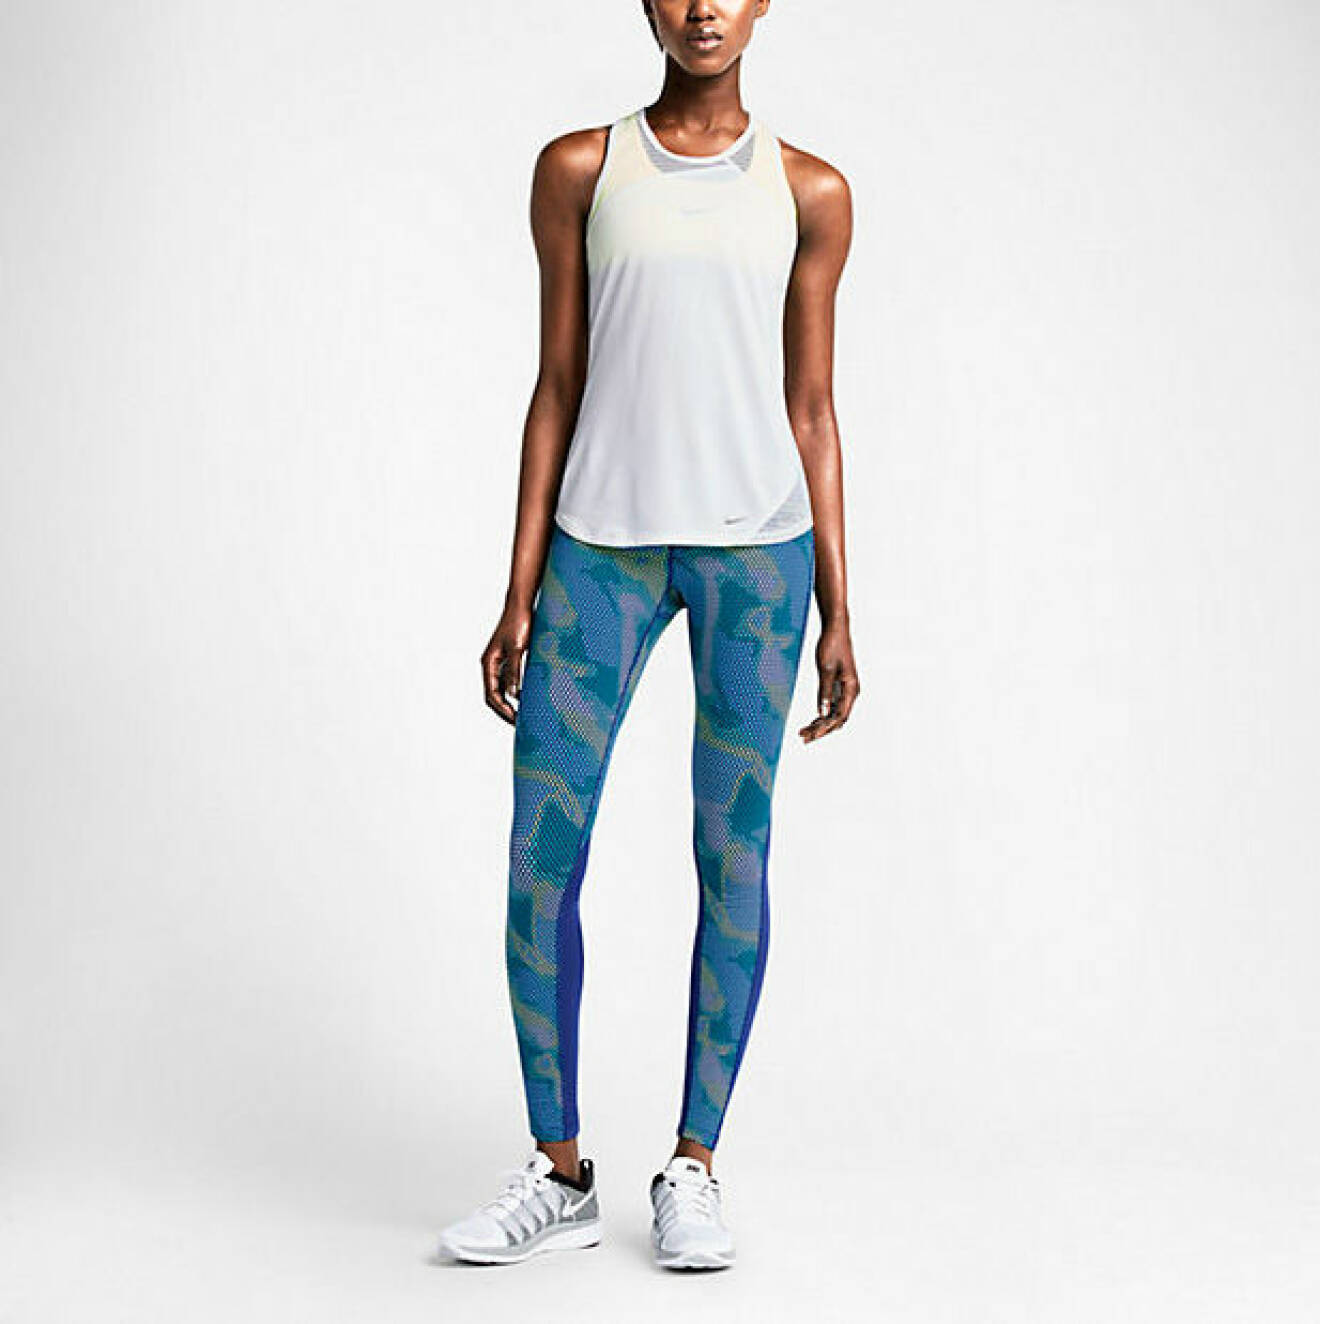 NIKE EPIC LUX PRINTED WOMEN'S RUNNING TIGHTS.